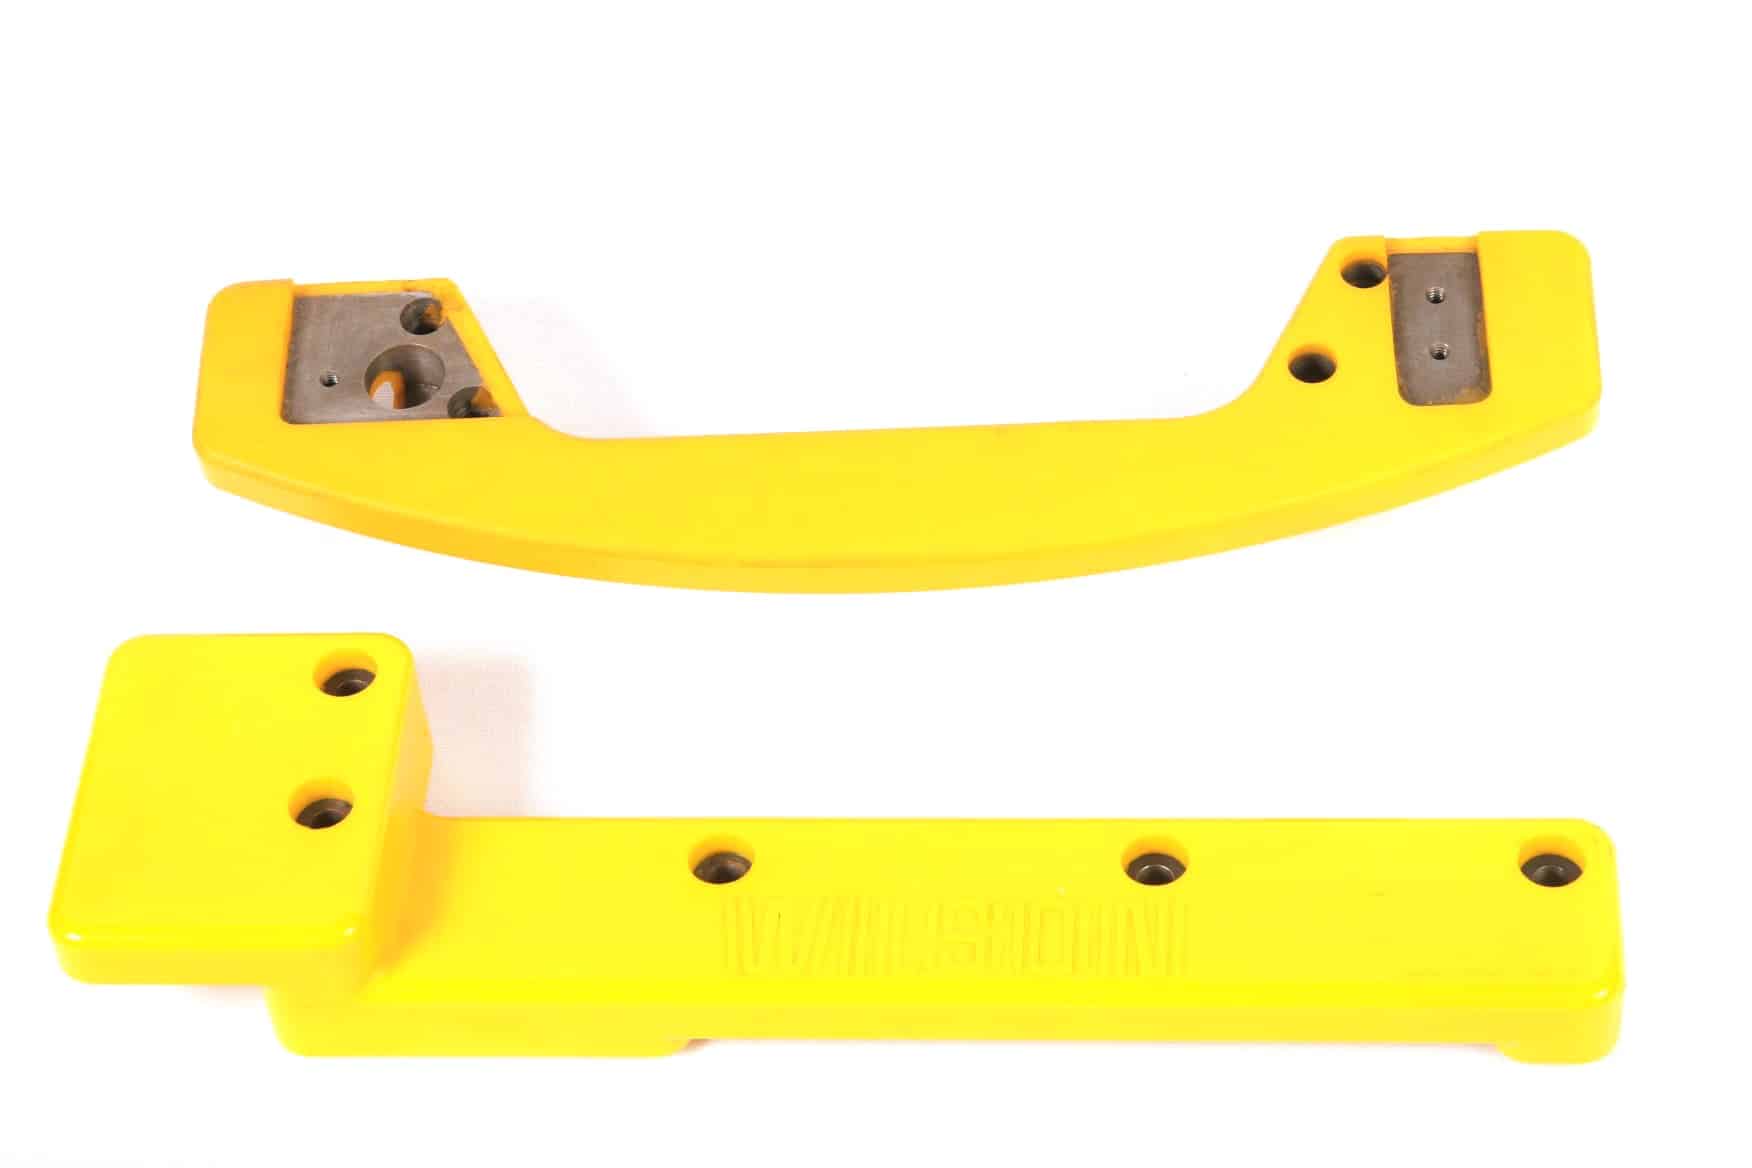 Large, yellow polyurethane bumpers with multiple metal inserts at connection points. 